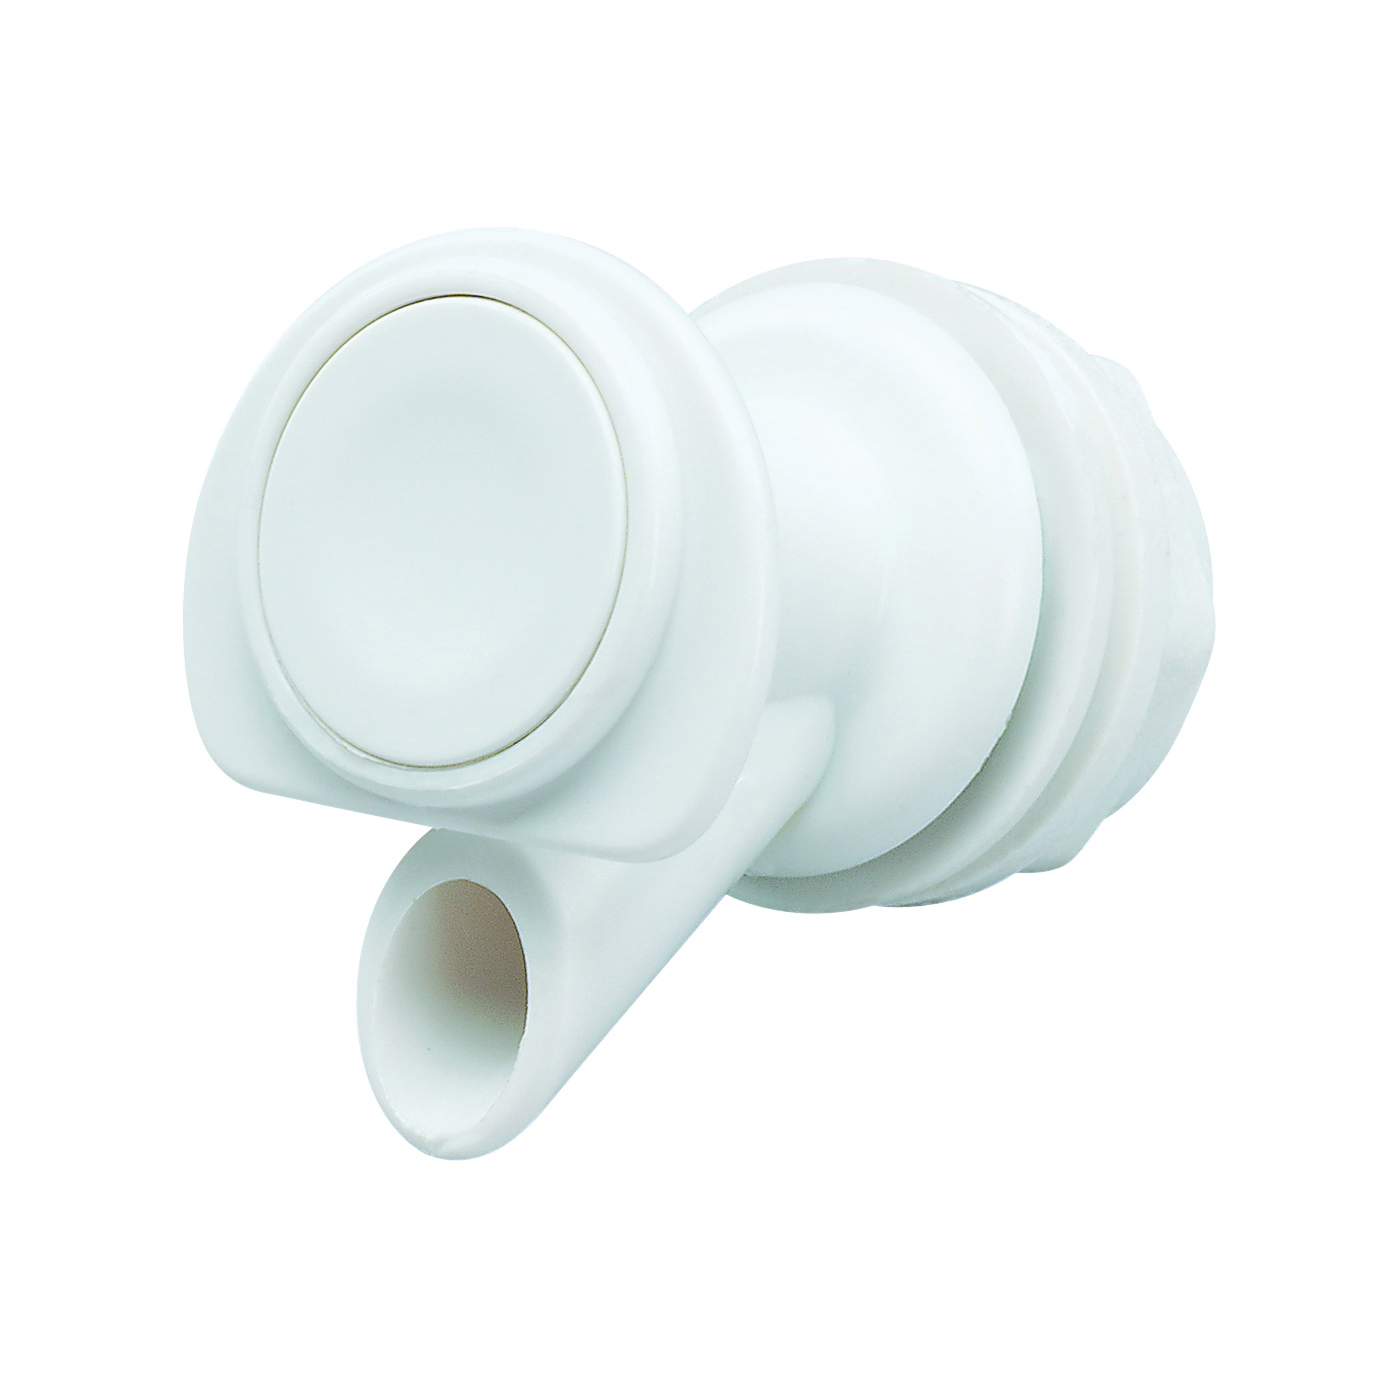 IGLOO 00024009 Water Cooler Spigot, Plastic, White, For: 1, 2, 3, 5 and 10 gal Plastic Coolers - 1